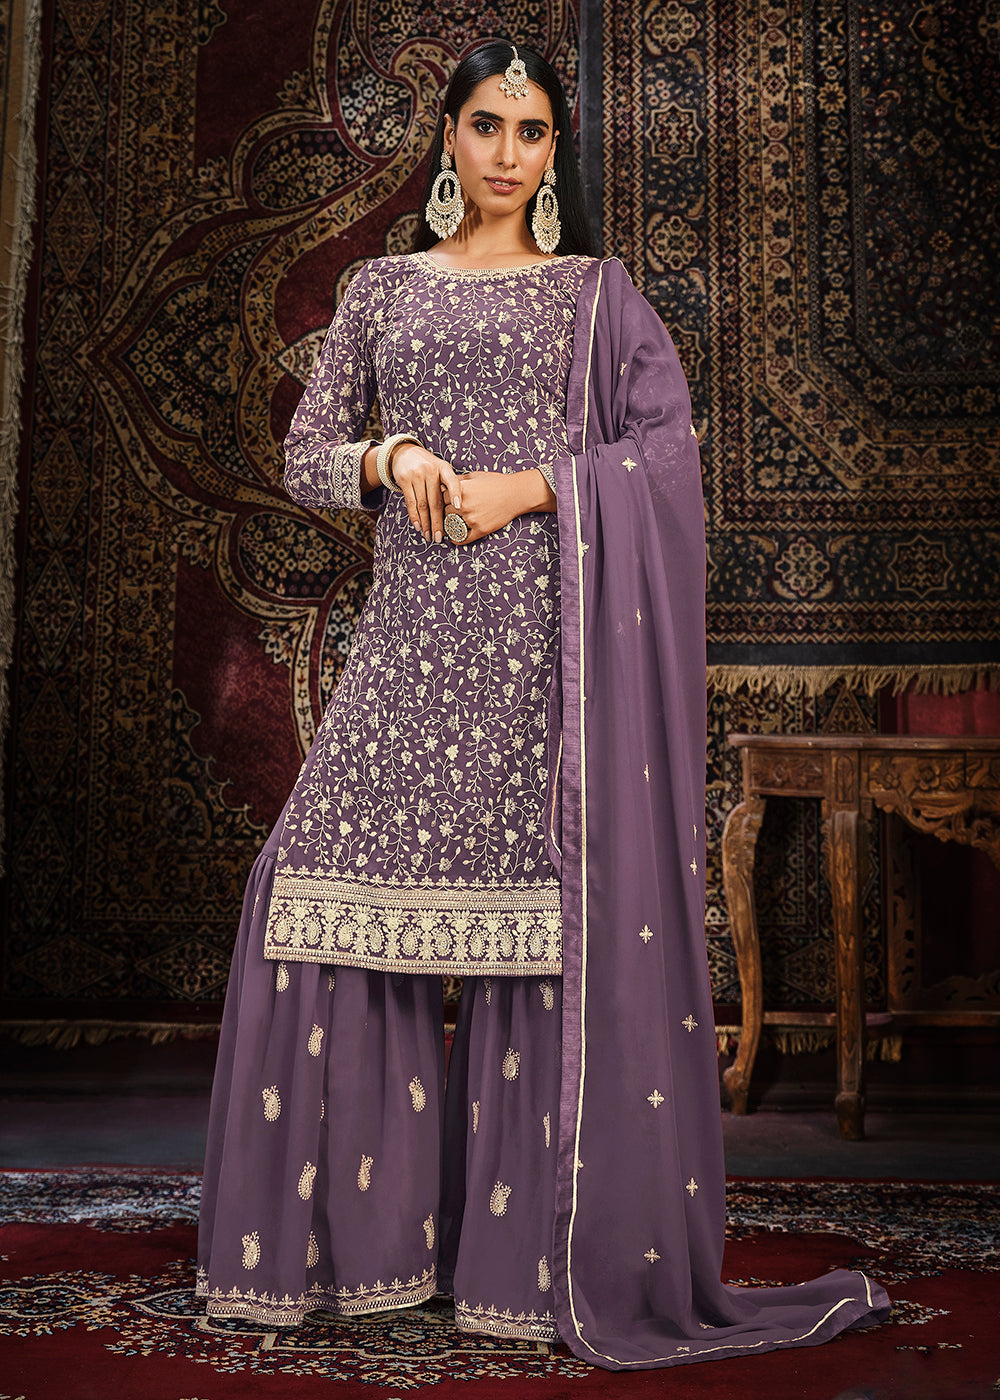 Buy Now Festive Purple Color Faux Georgette Palazzo Suit Online in USA, UK, Canada, Germany, Australia & Worldwide at Empress Clothing. 